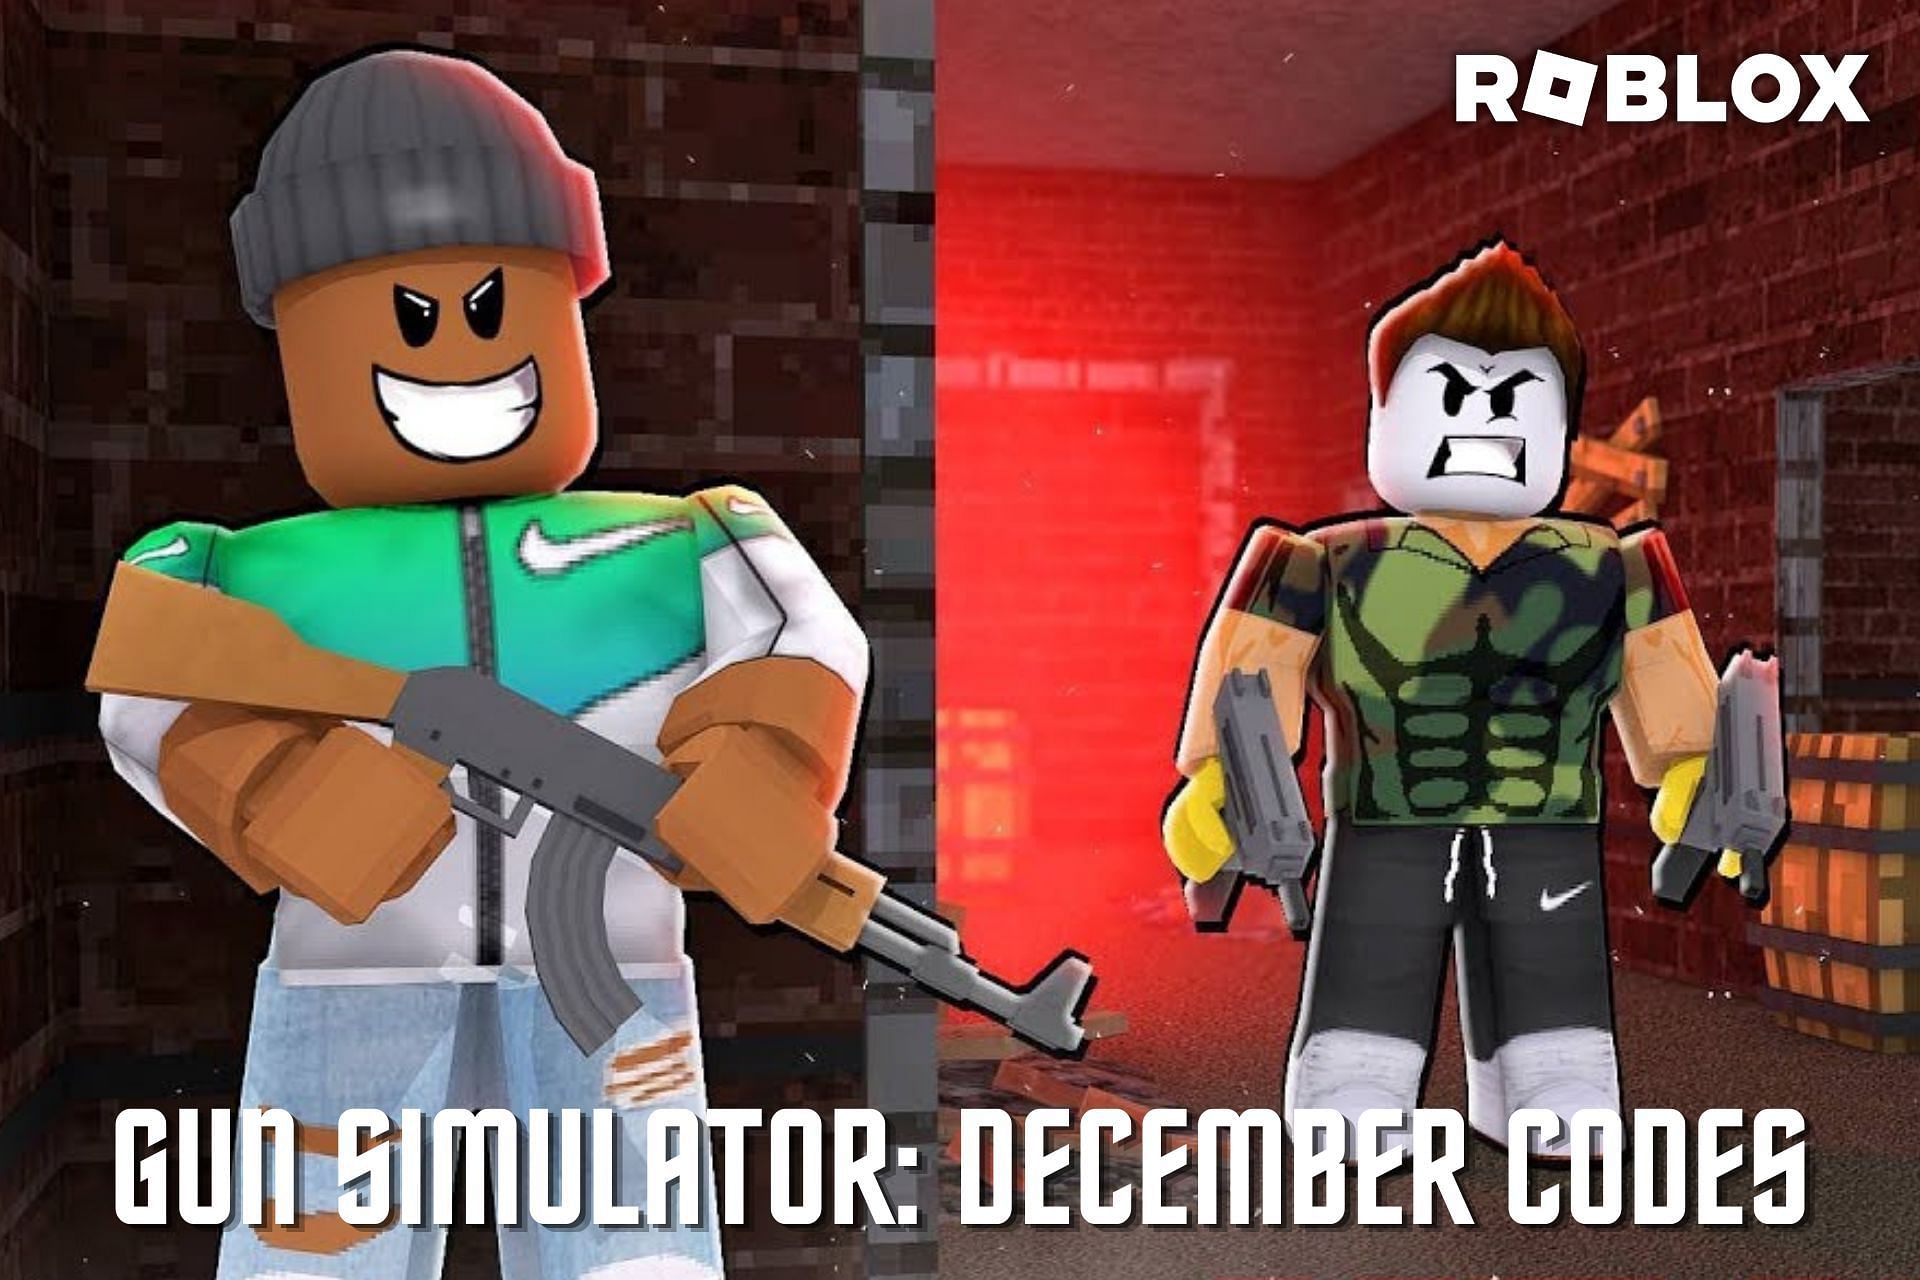 Roblox Gun Simulator codes for December 2022 Free coins and boosts